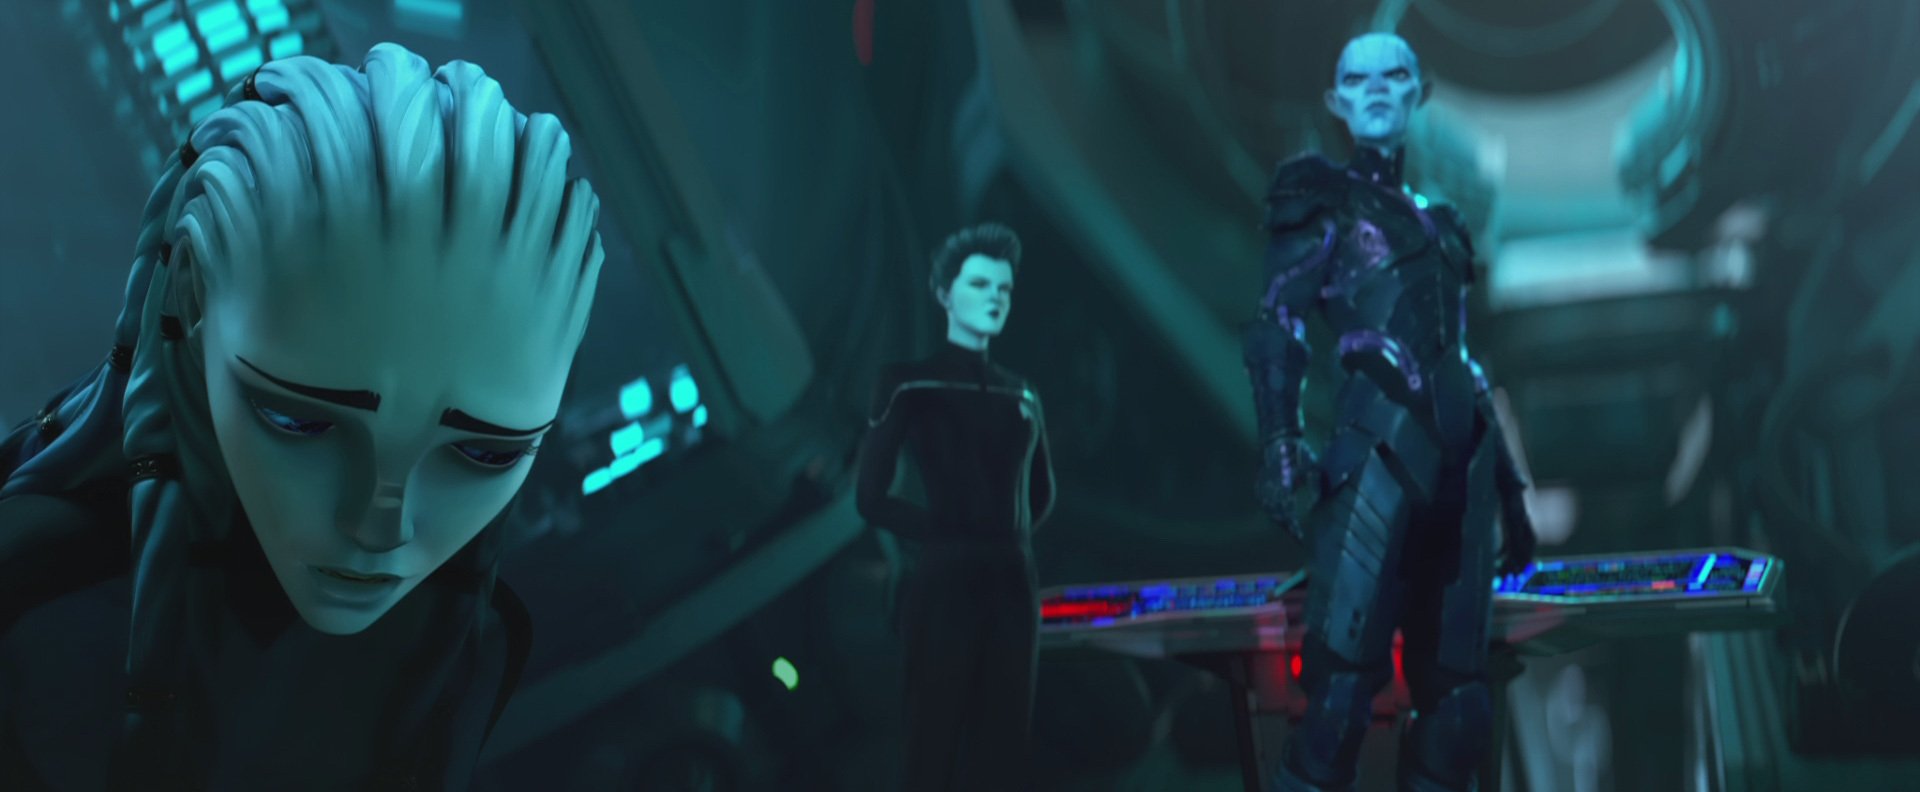   STAR TREK: PRODIGY: Ep#110 -- Ella Purnell as Gwyn, Kate Mulgrew as Janeway and John Noble as The Diviner in STAR TREK: PRODIGY streaming on Paramount+. Photo: Nickelodeon/Paramount+(C)2022 VIACOM INTERNATIONAL. All Rights Reserved.  